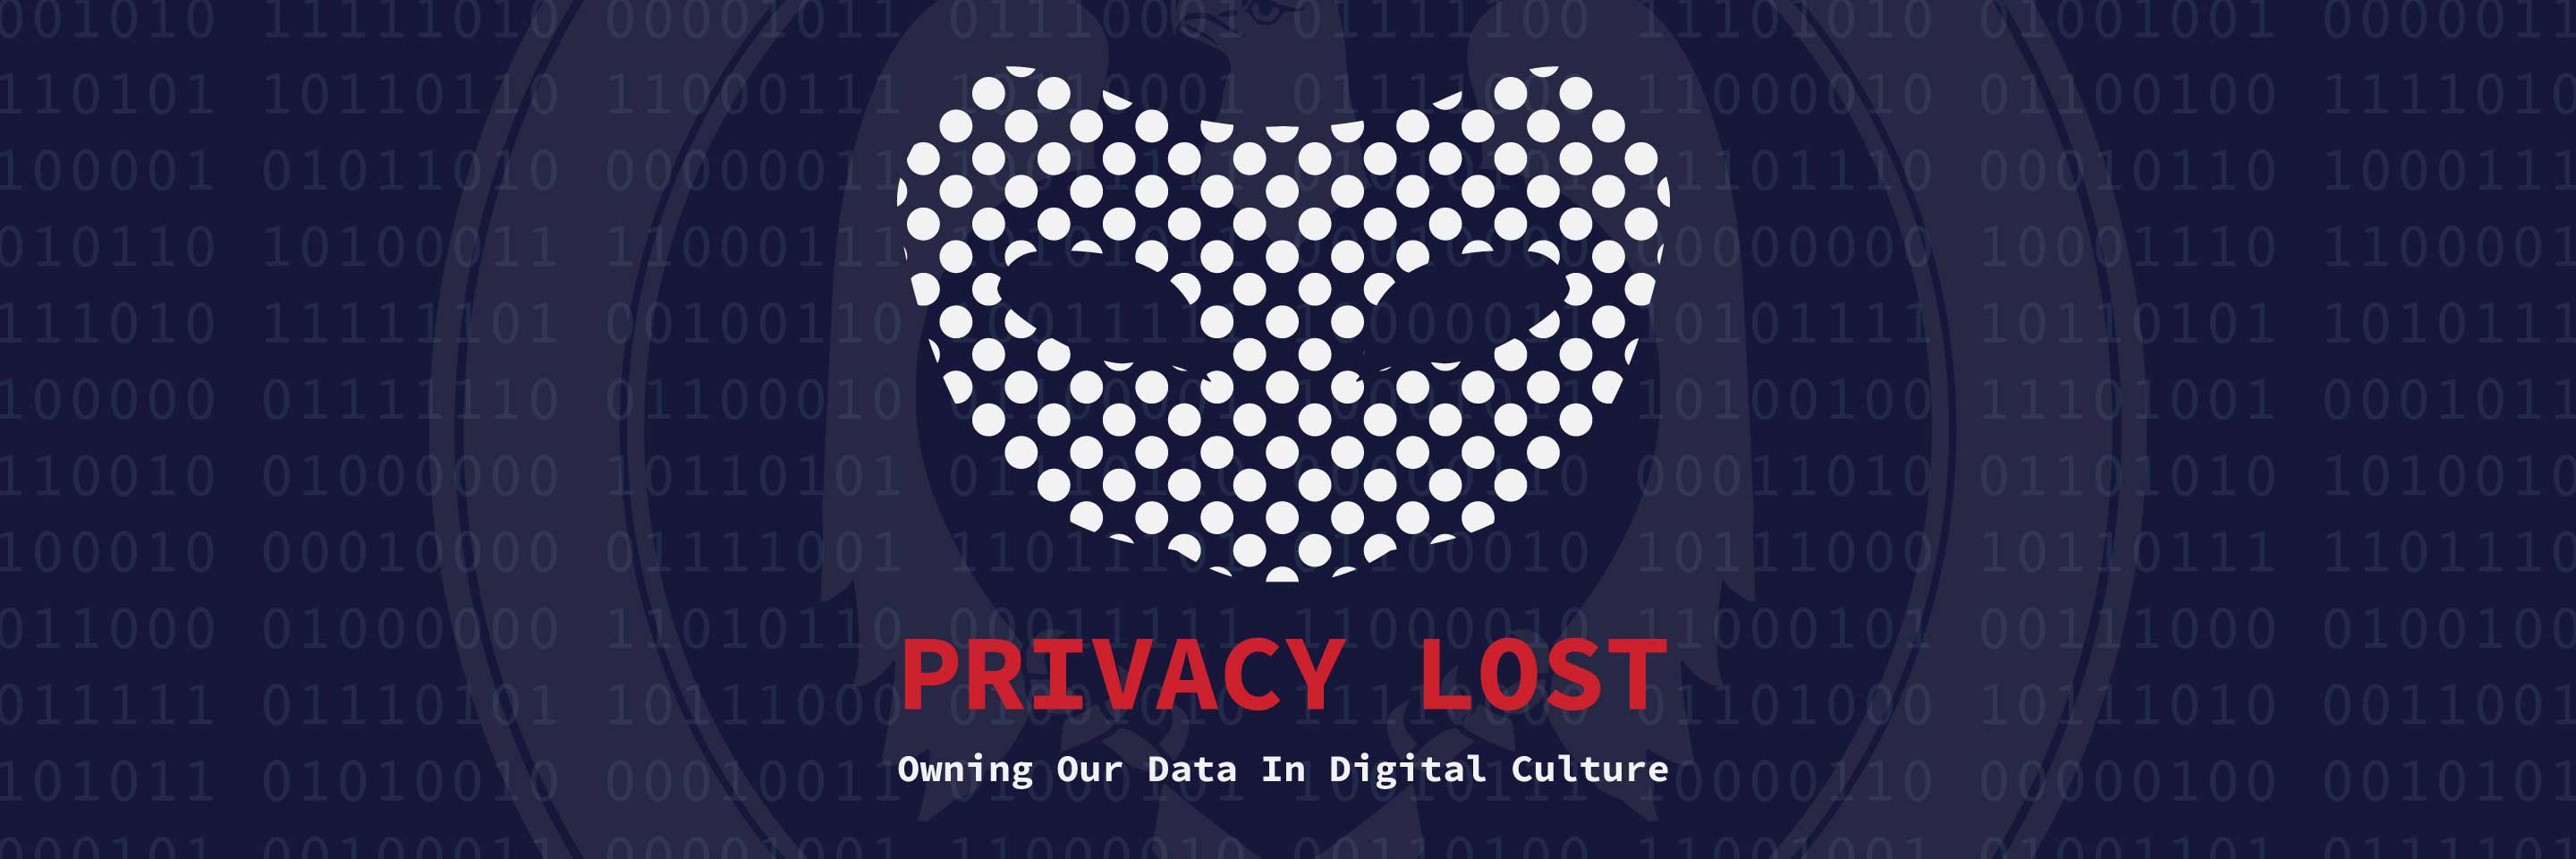 Privacy Lost: Owning Our Data In Digital Culture